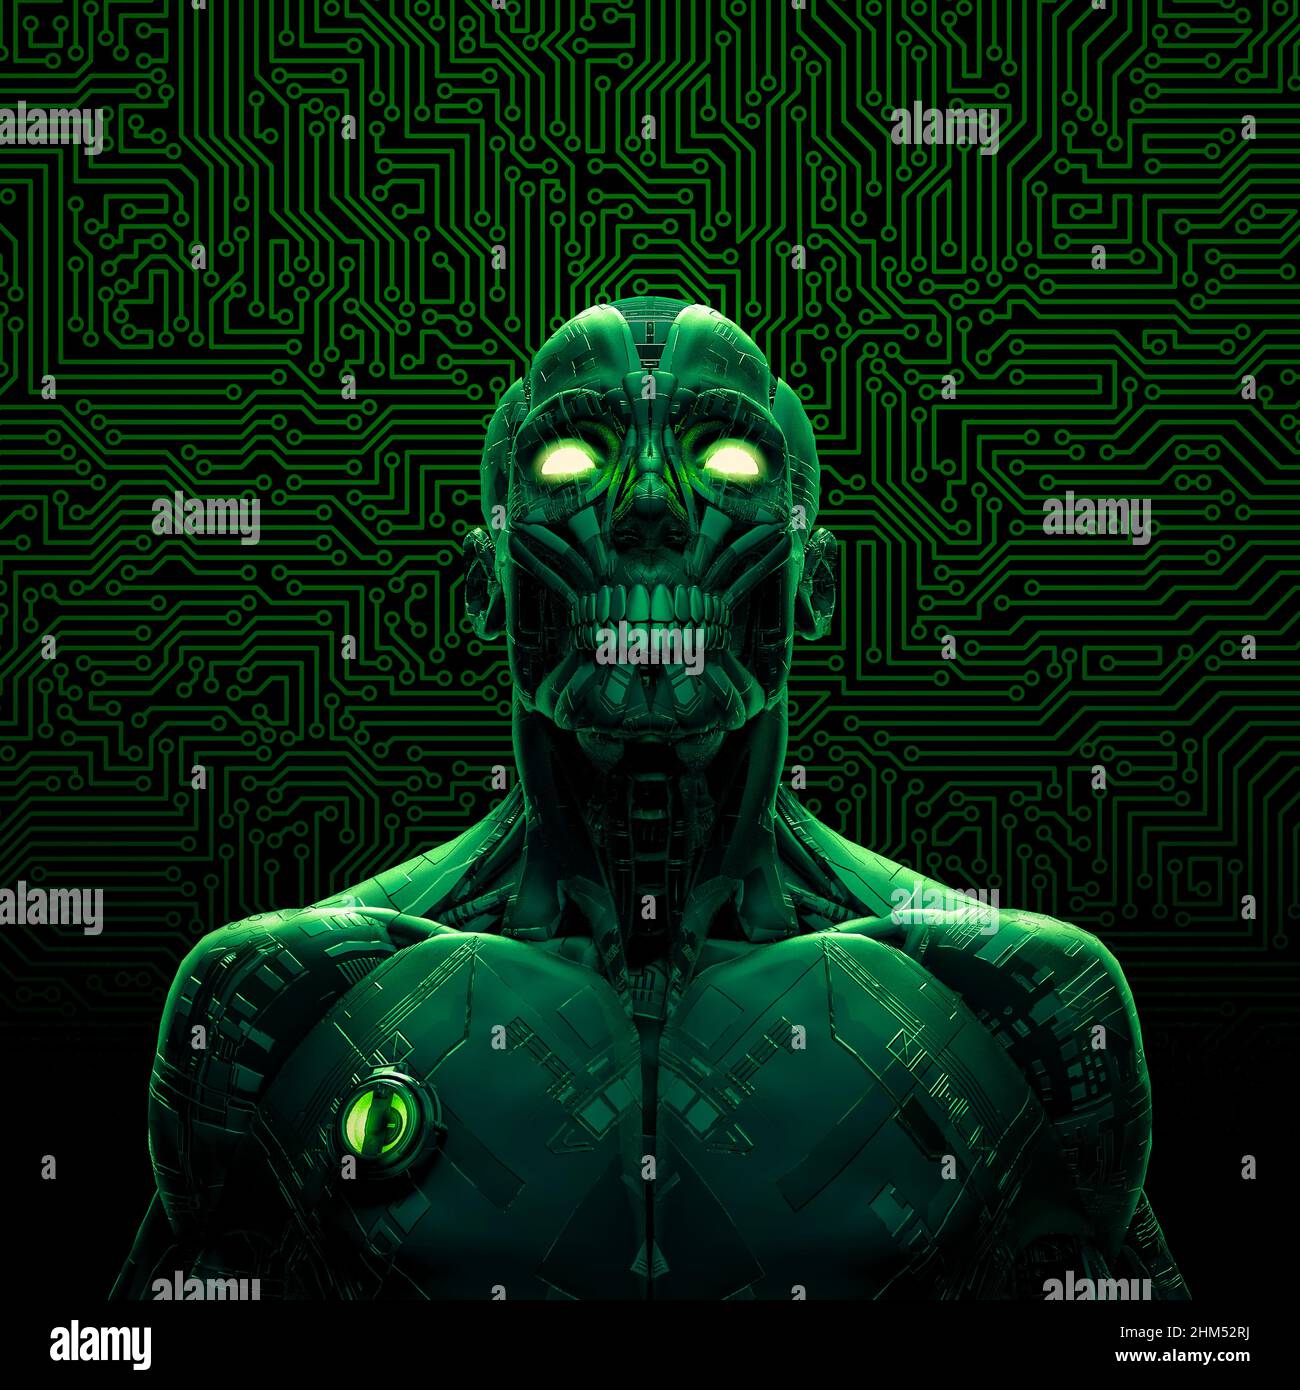 Zombie cyborg artificial intelligence - 3D illustration of dark green humanoid alien robot with computer circuit board background Stock Photo